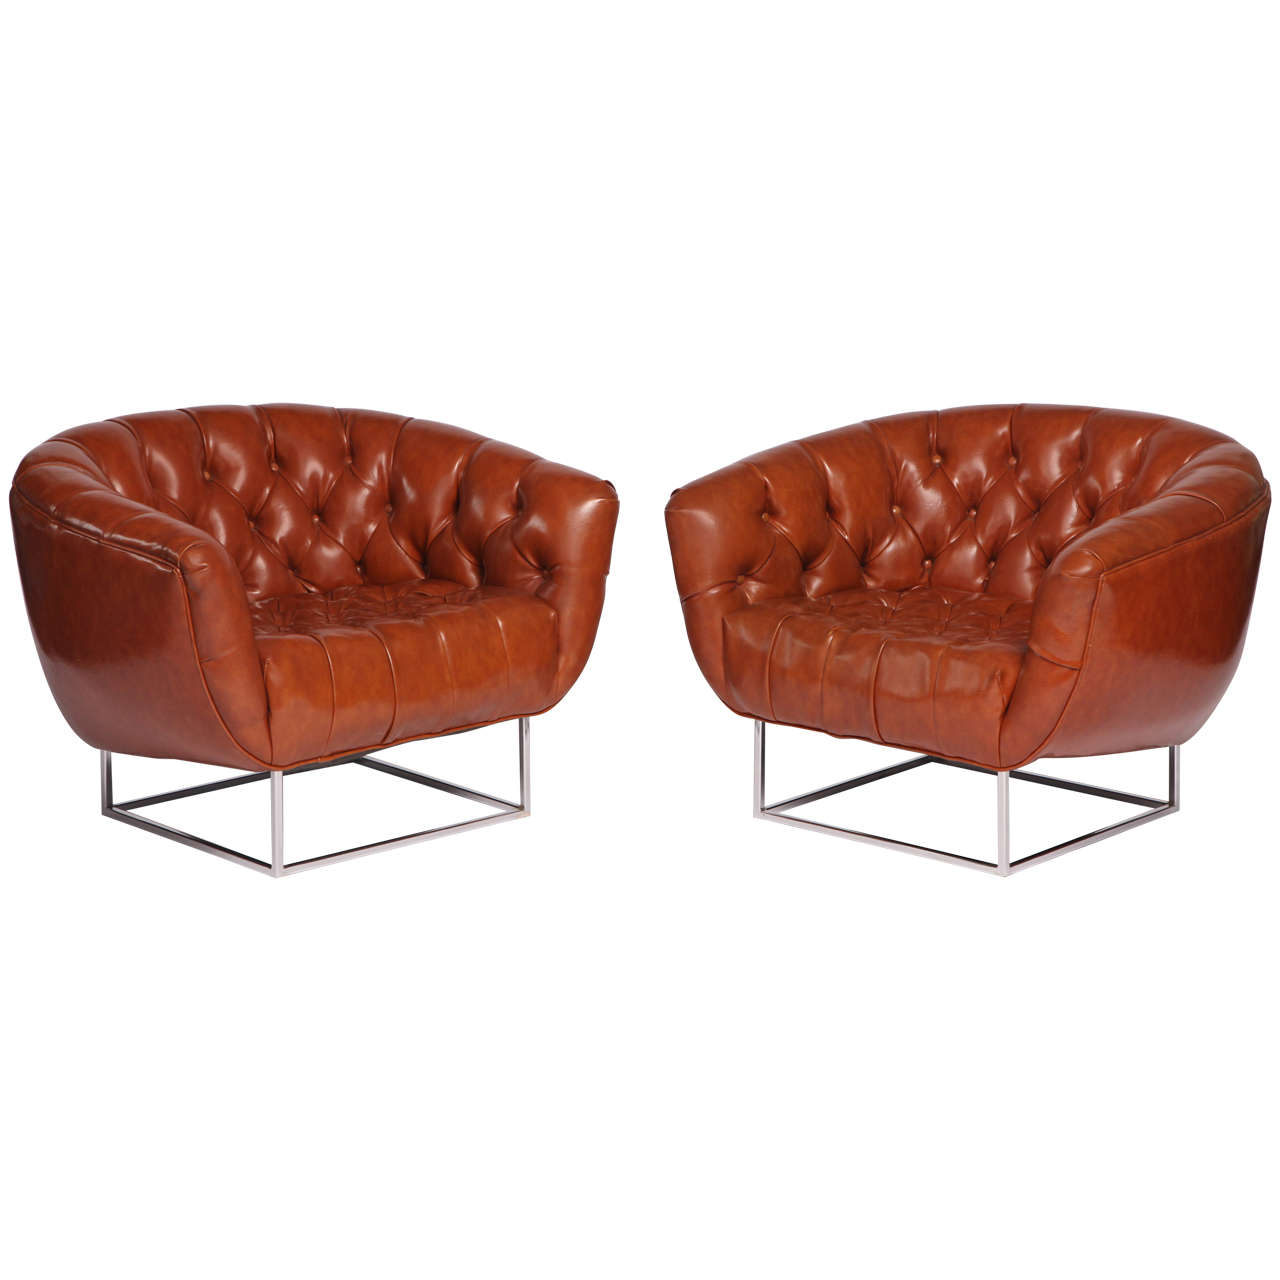 Pair of Brown Barrel Back Club Chairs by Milo Baughman